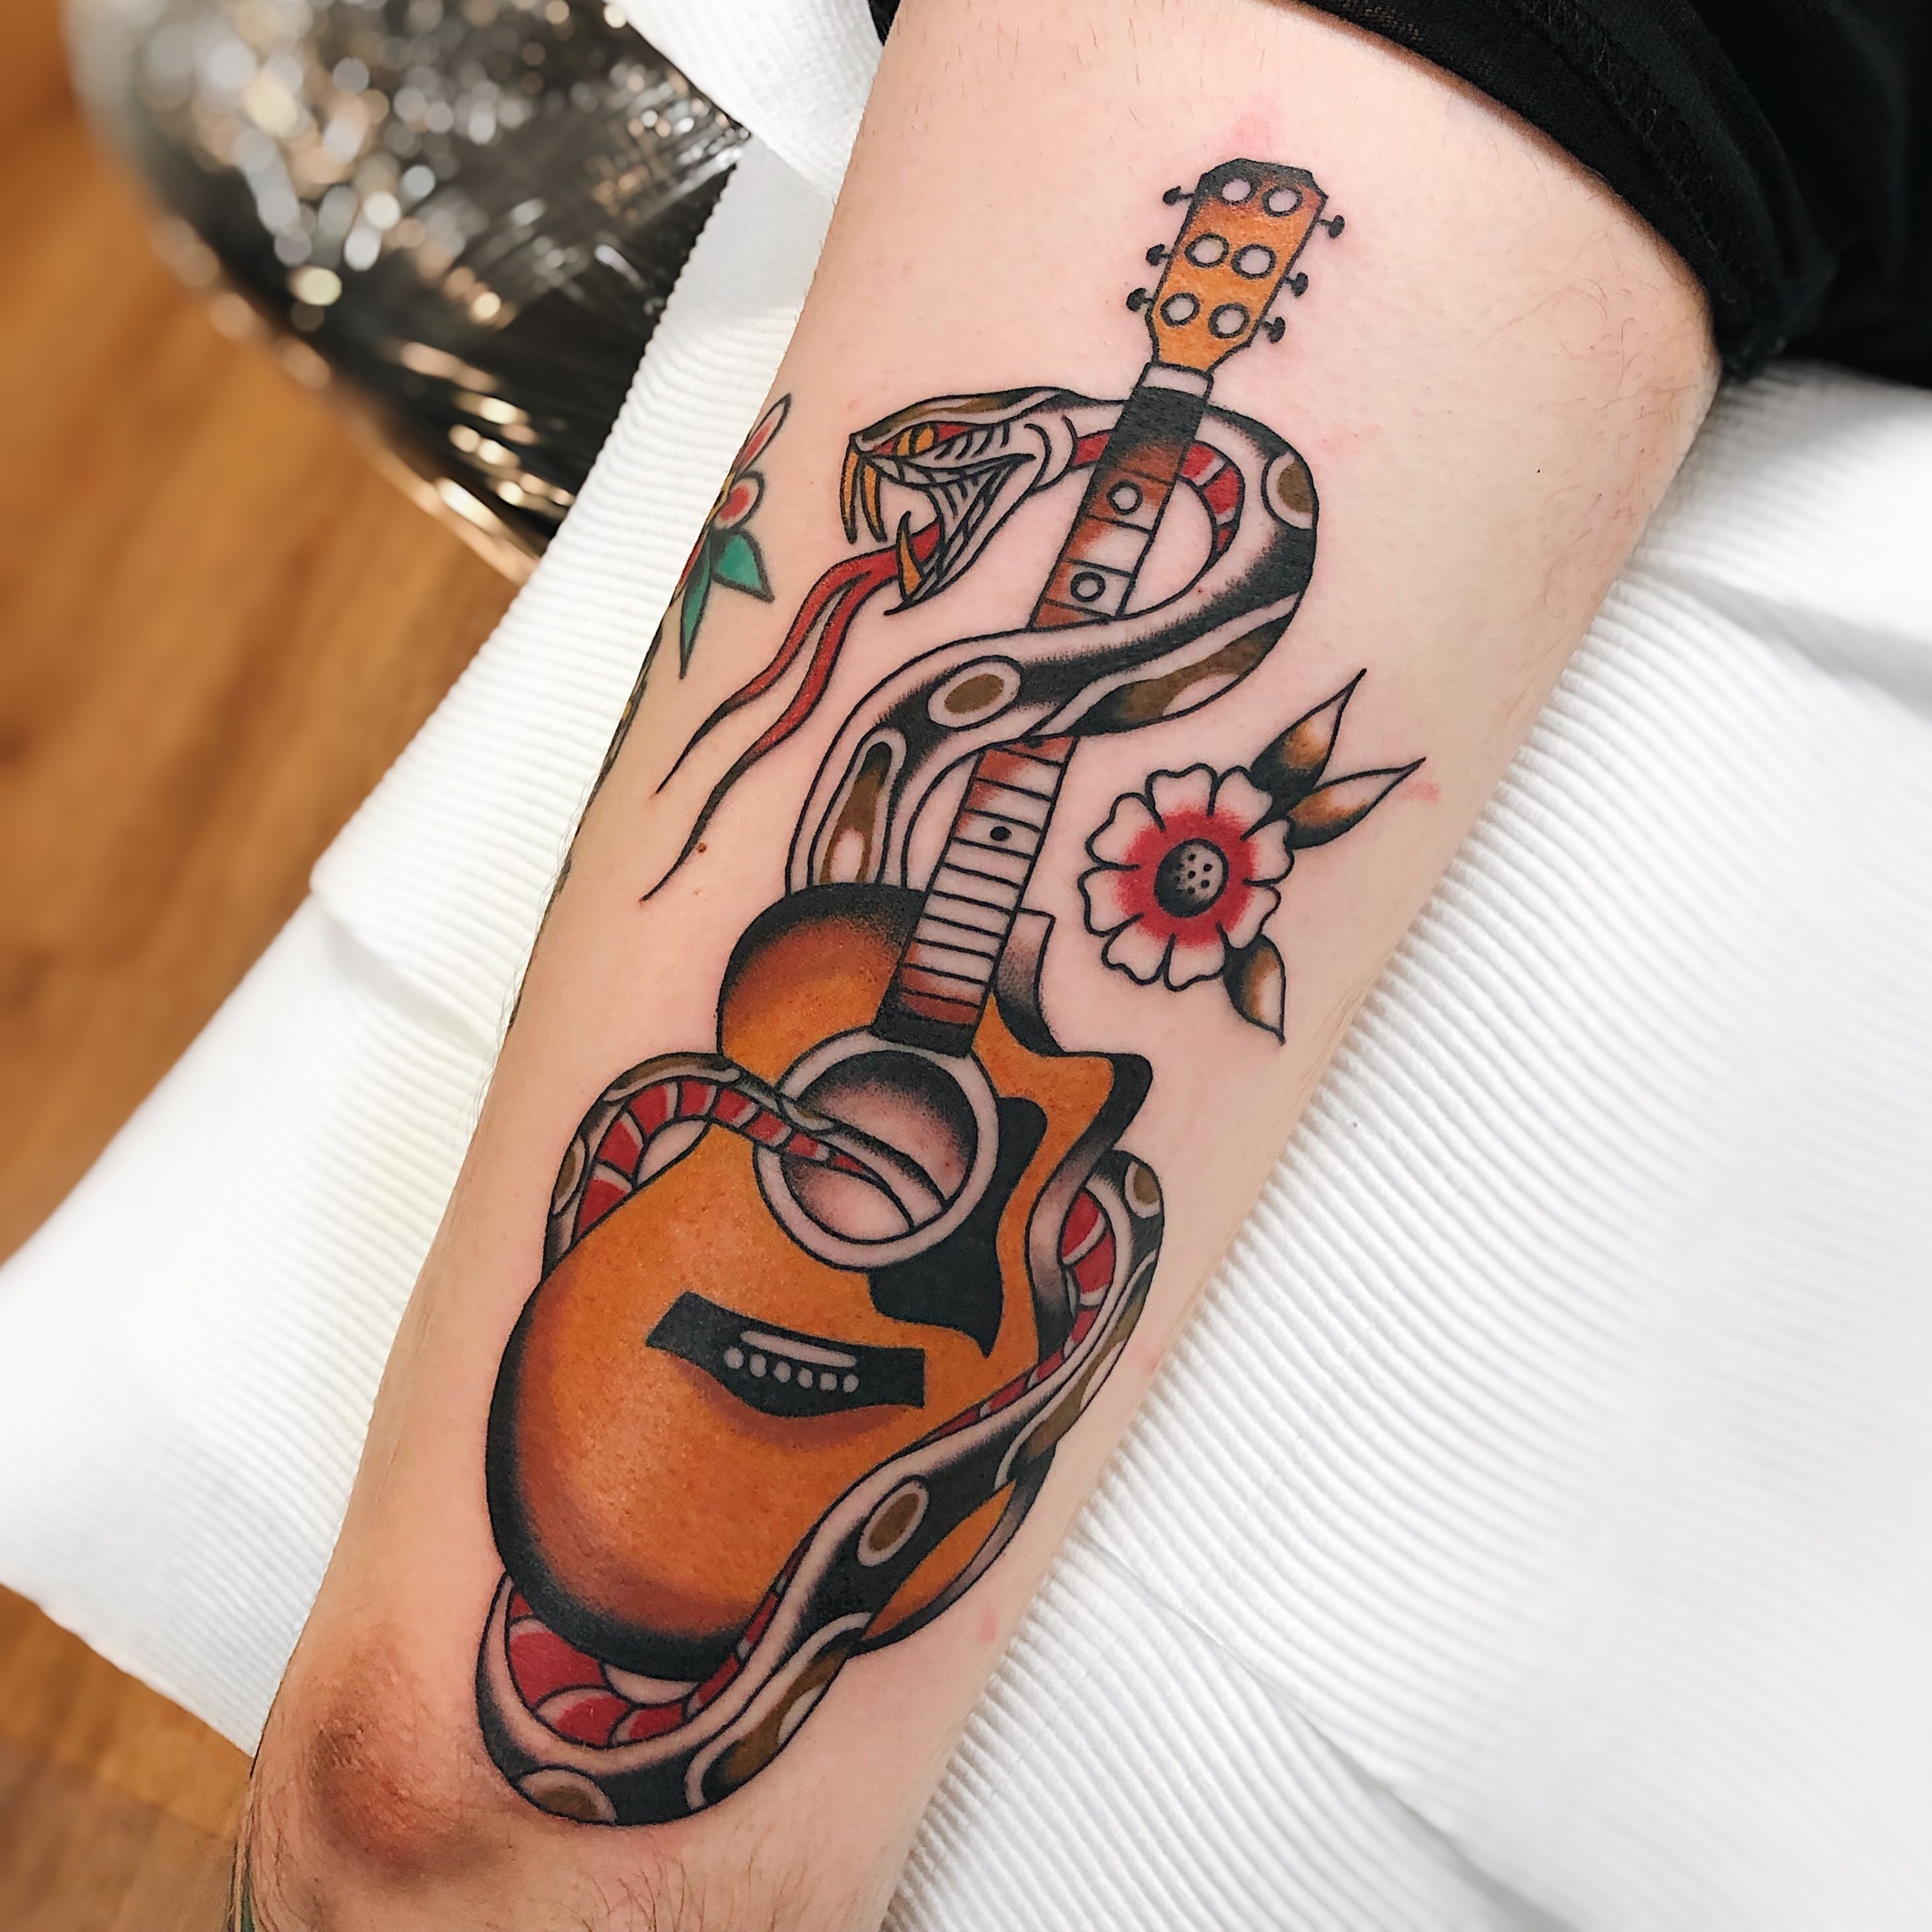 Tattoo uploaded by minerva  Cowboy playing guitar Tattoo by Pancho  PanchosPlacas Oldschool Traditional Cowboytattoo cowboy guitar   Tattoodo